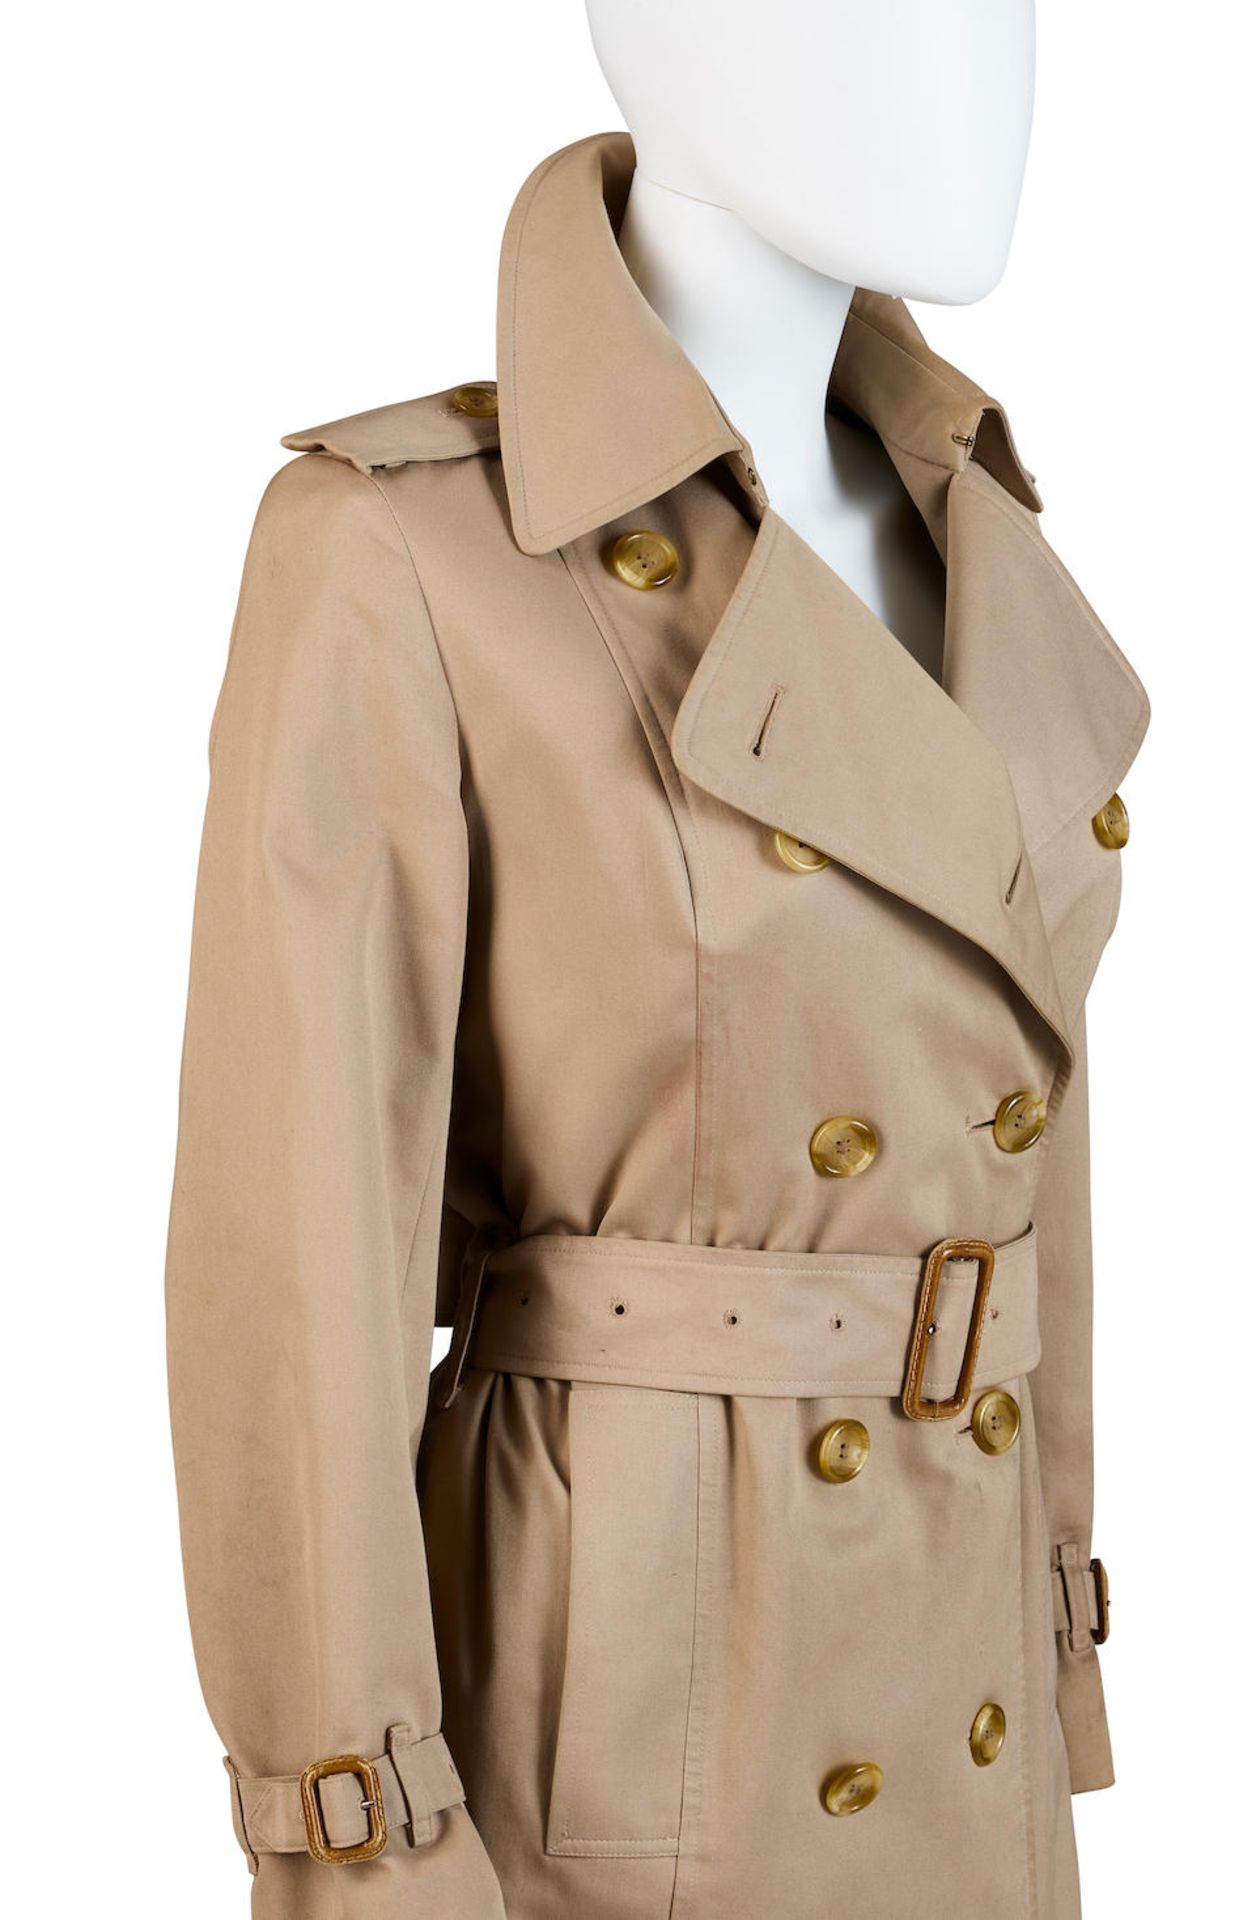 BURBERRYS': TRENCH COAT 1990-1999 - Image 2 of 2